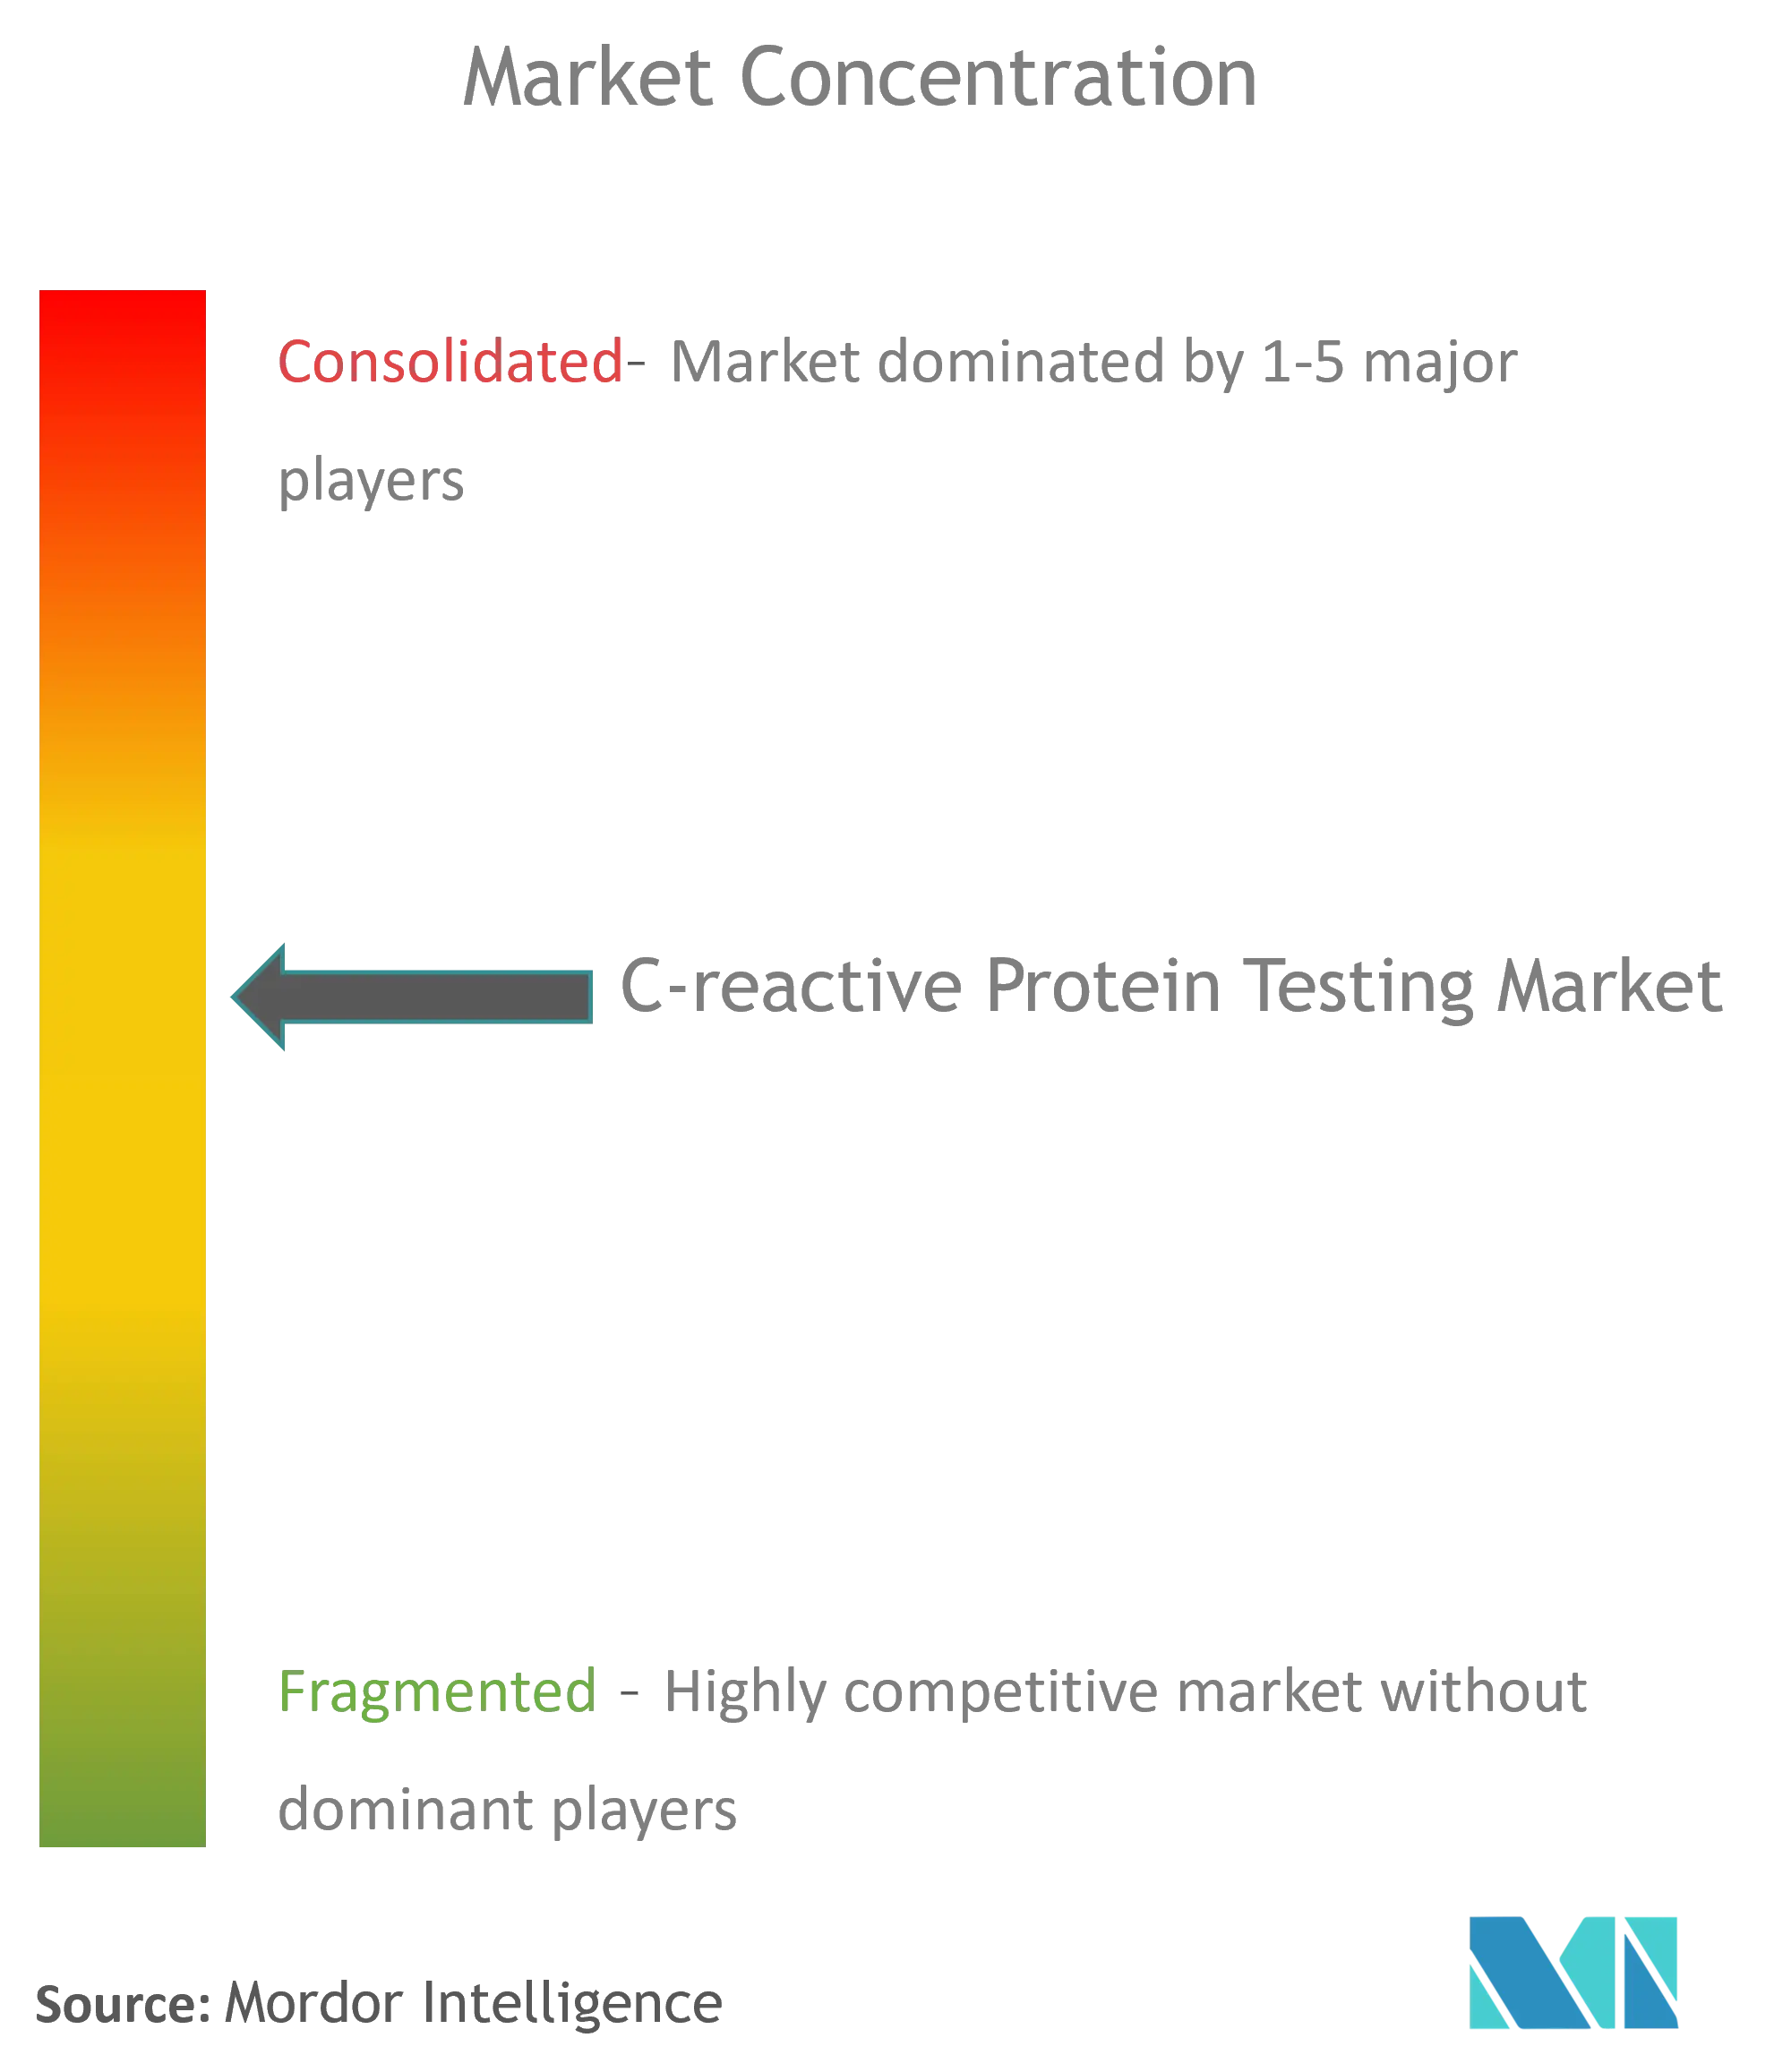 C-reactive Protein Testing Market Concentration